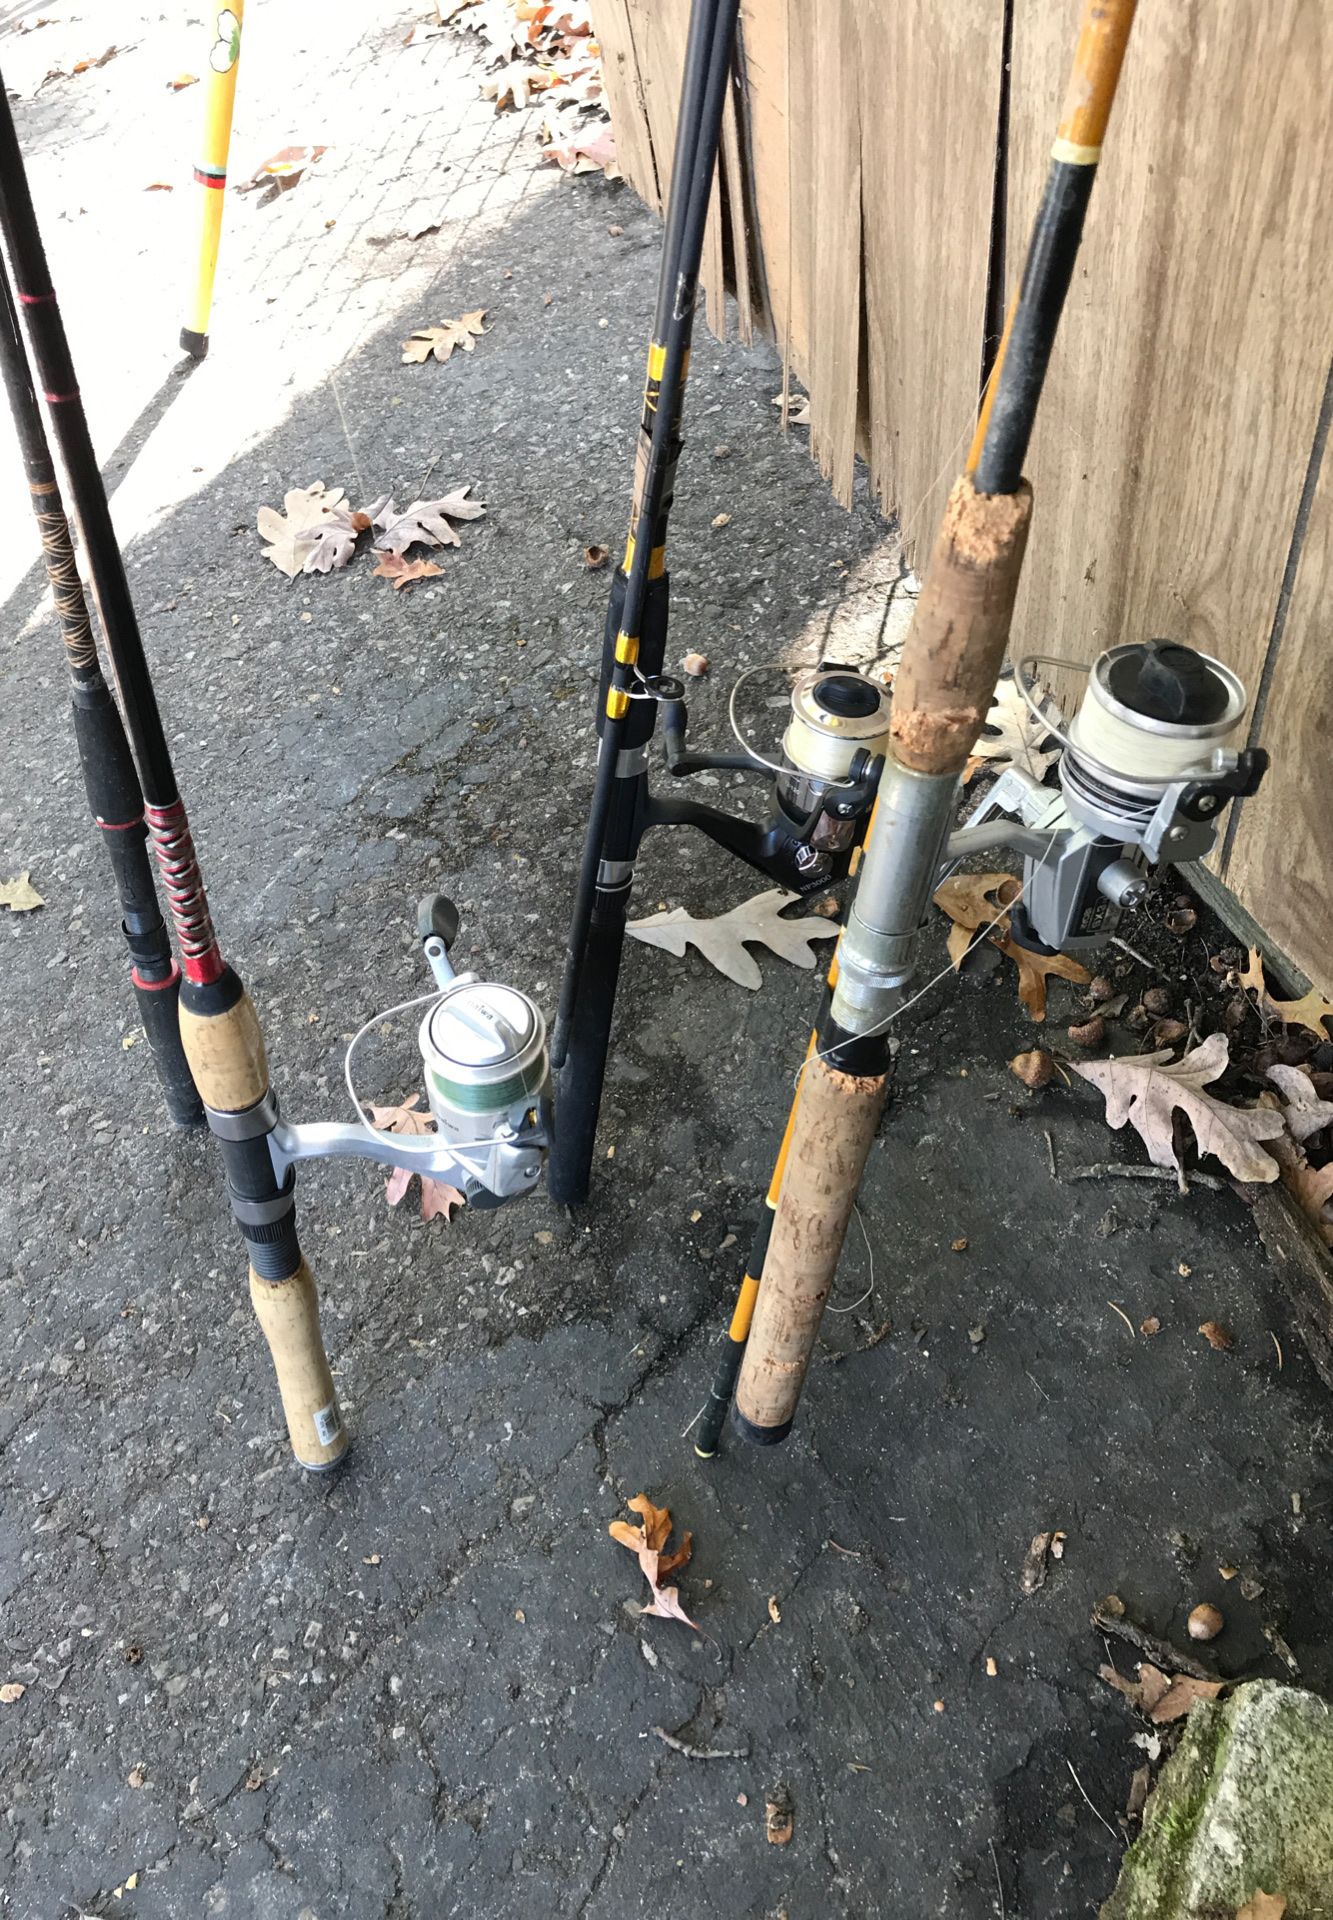 3 rods & reals & 1 road take all at low price